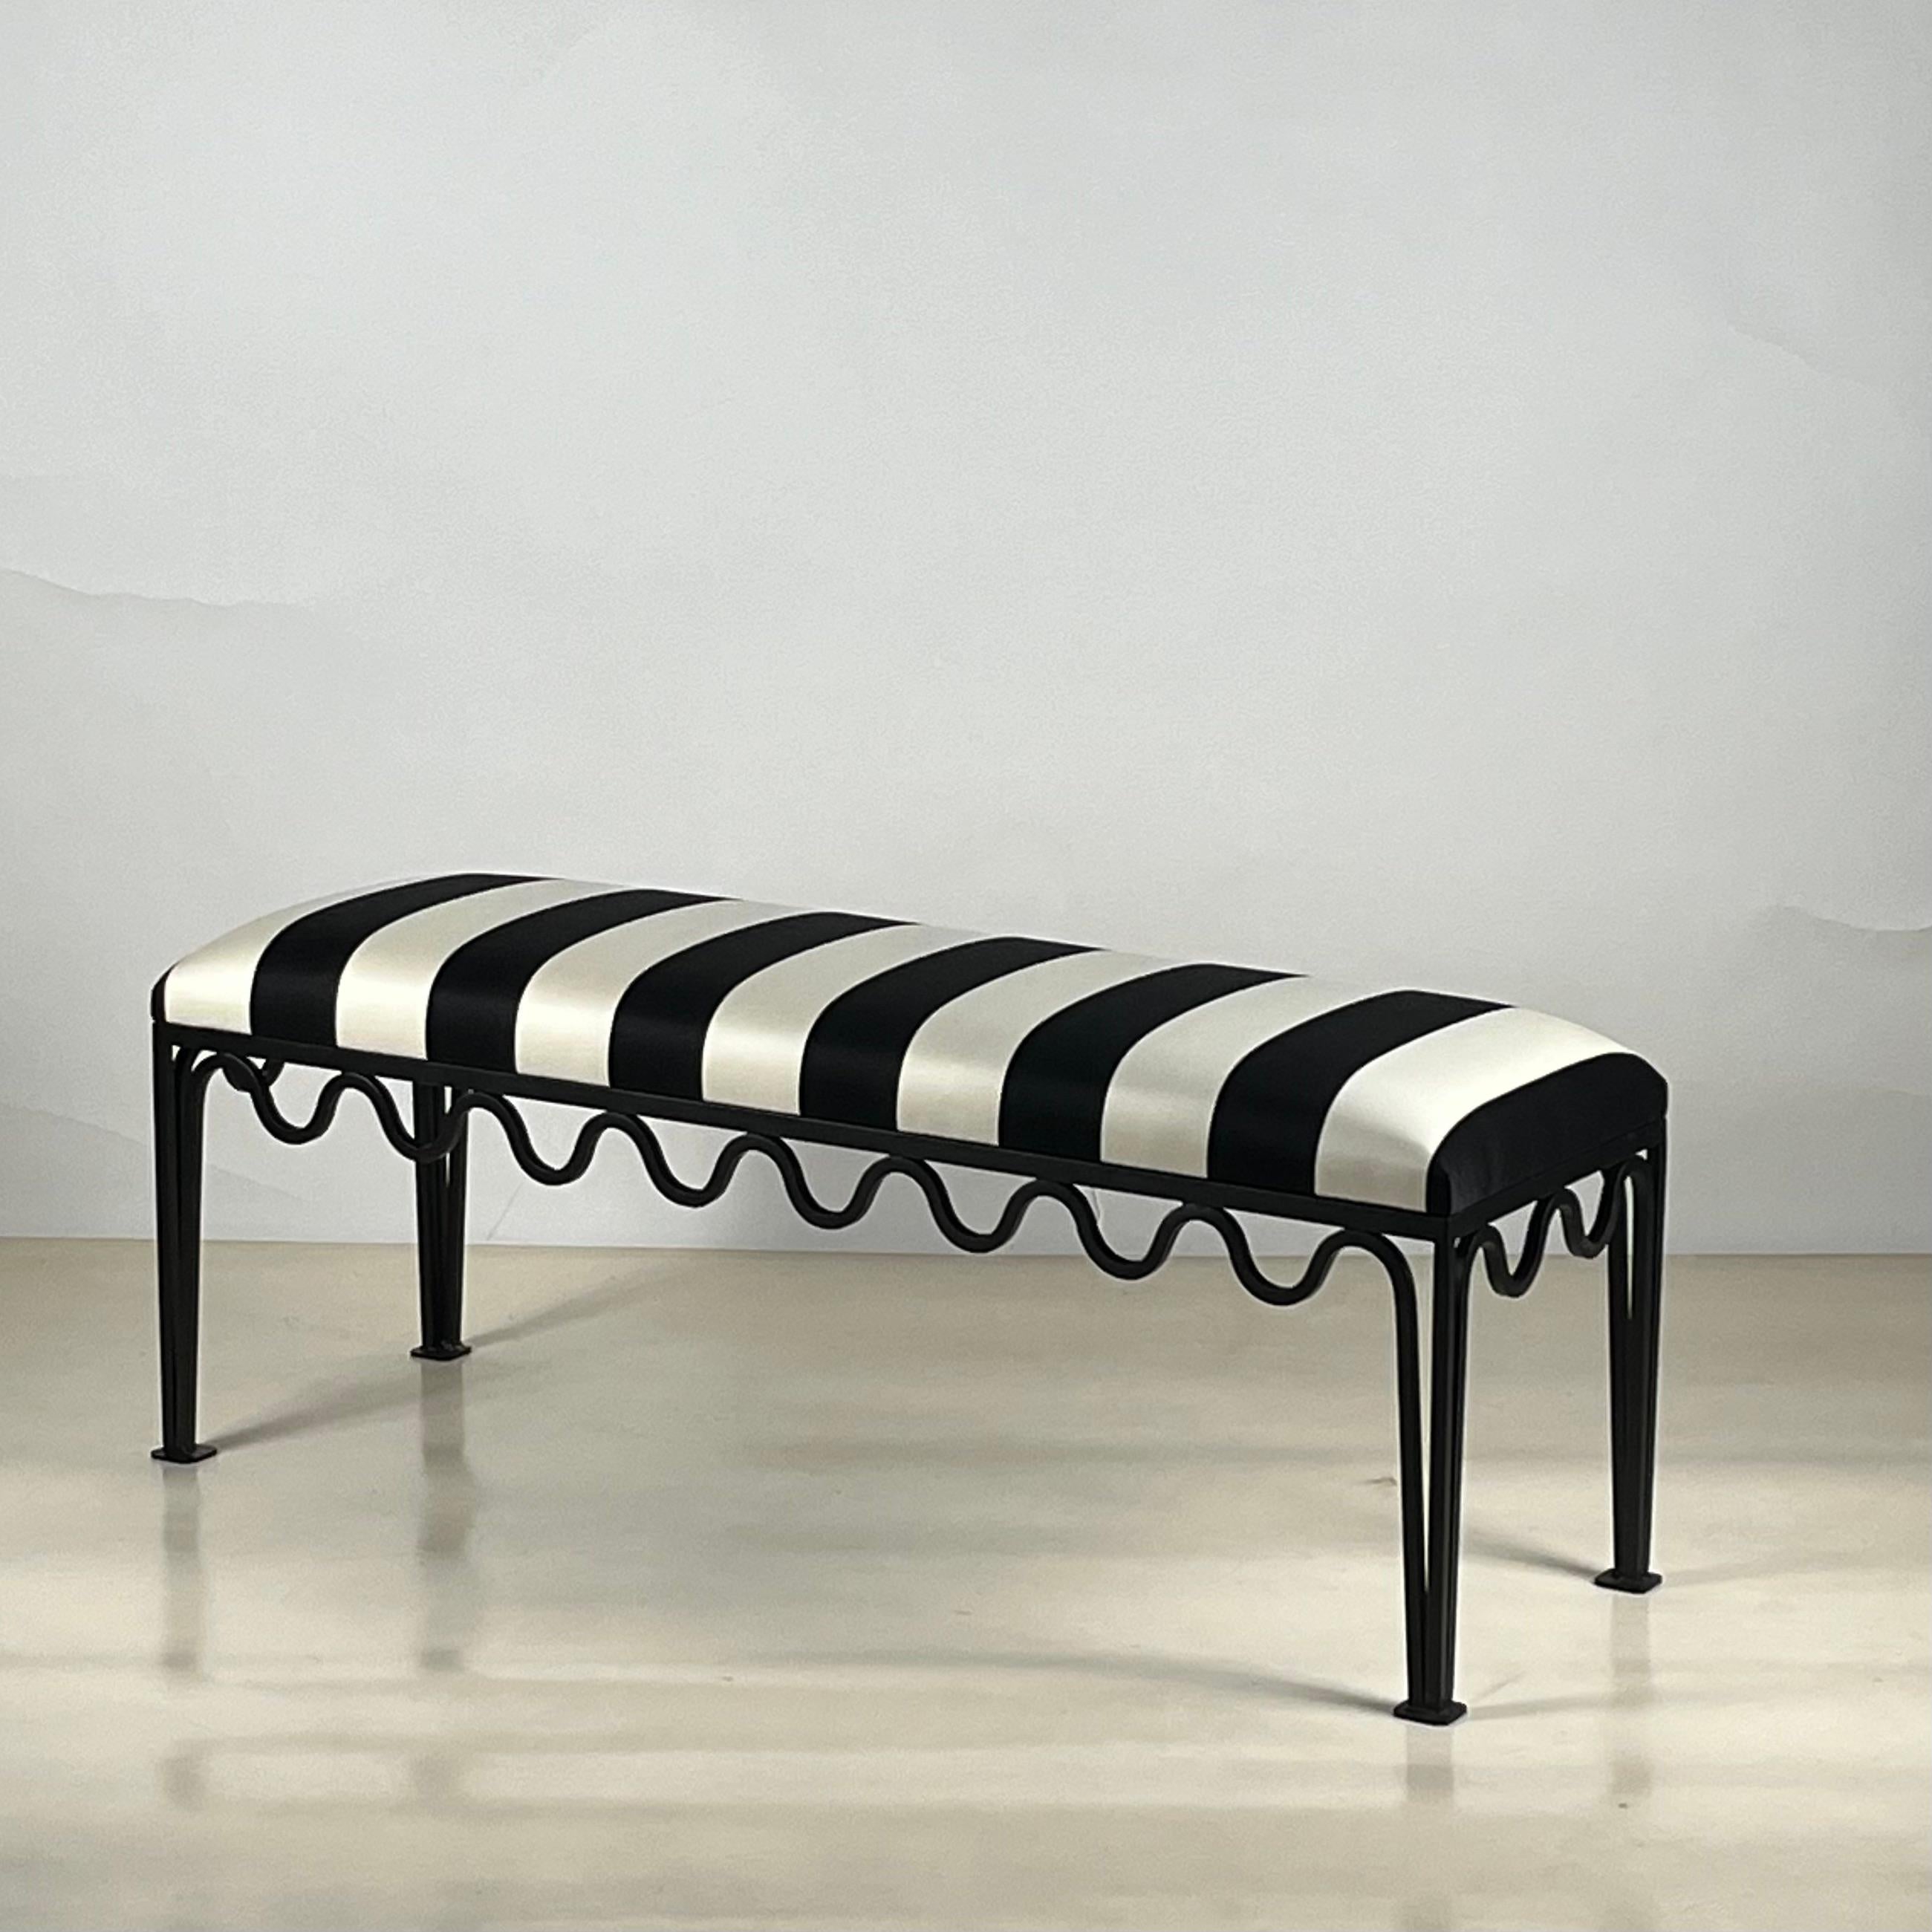 French Narrow 'Méandre' Bench by Design Frères, in COM For Sale